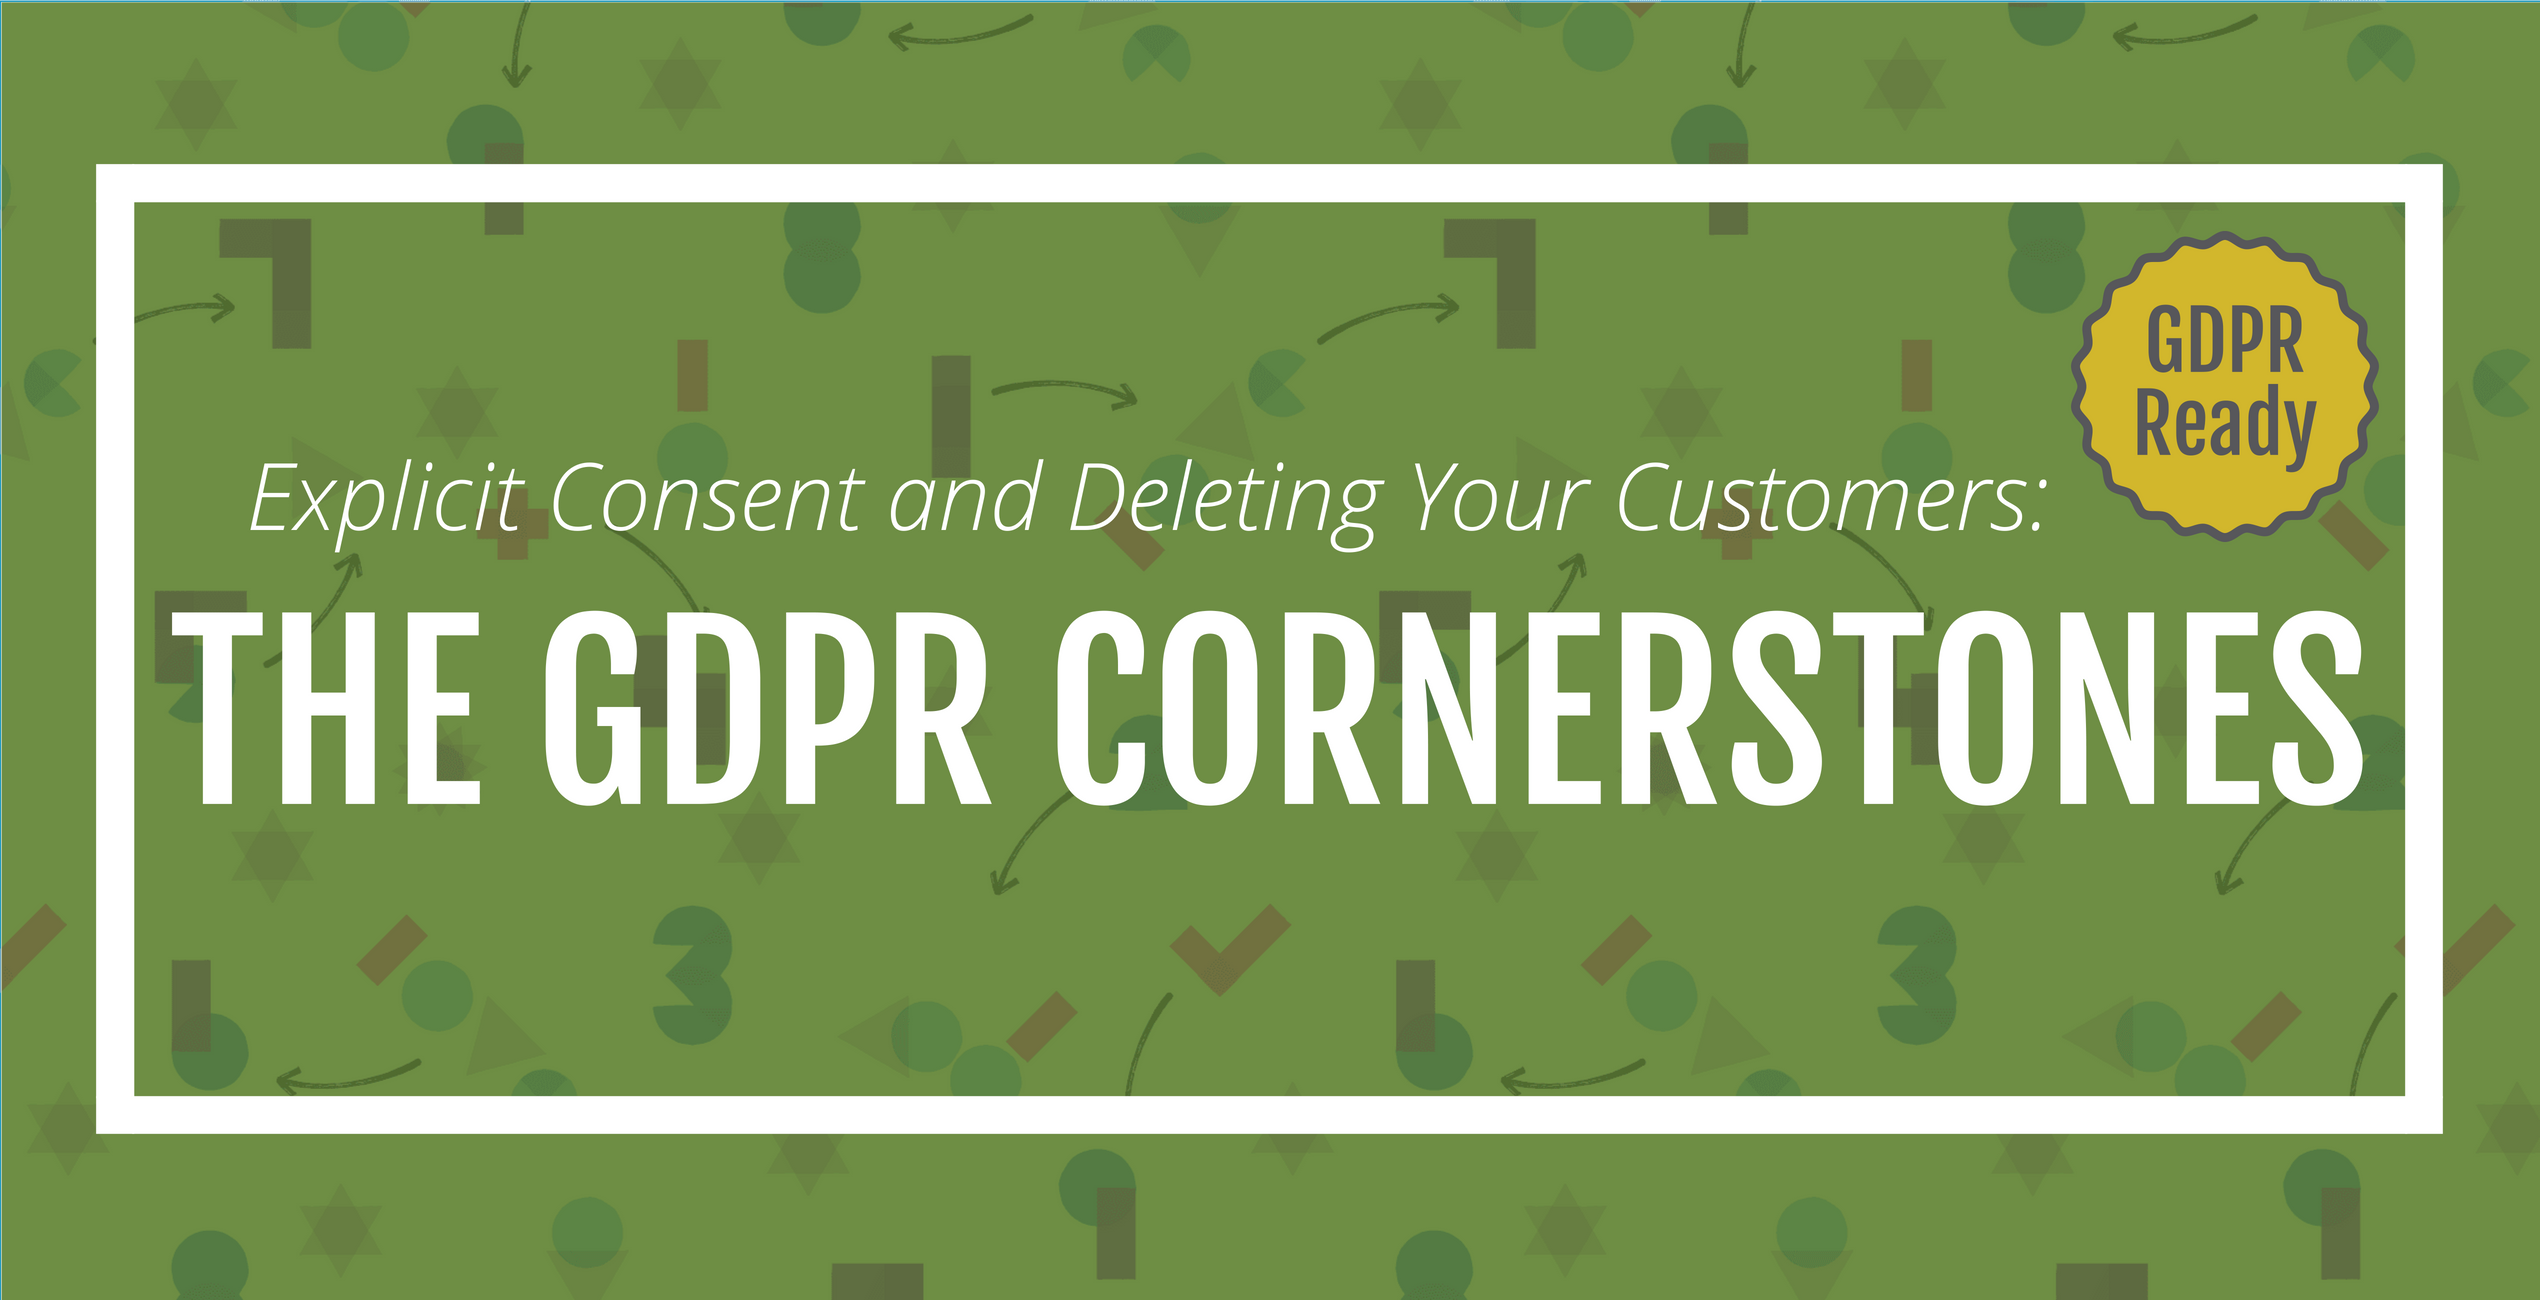 Explicit Consent and Deleting Your Customers, The GDPR Cornerstones